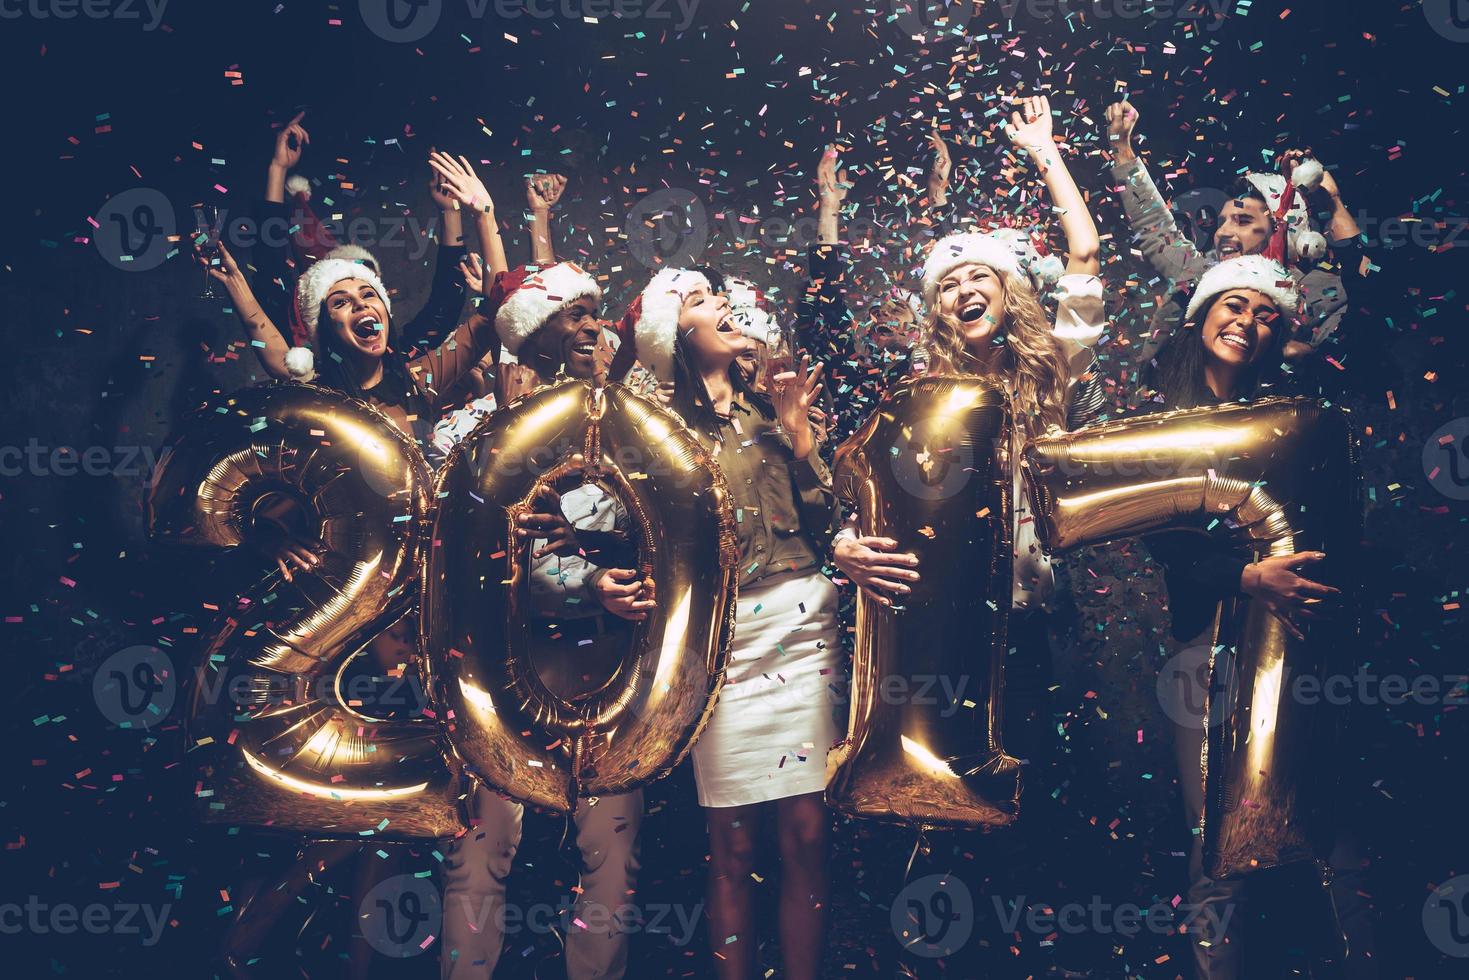 New 2017 Year is coming Group of cheerful young people in Santa hats carrying gold colored numbers and throwing confetti photo